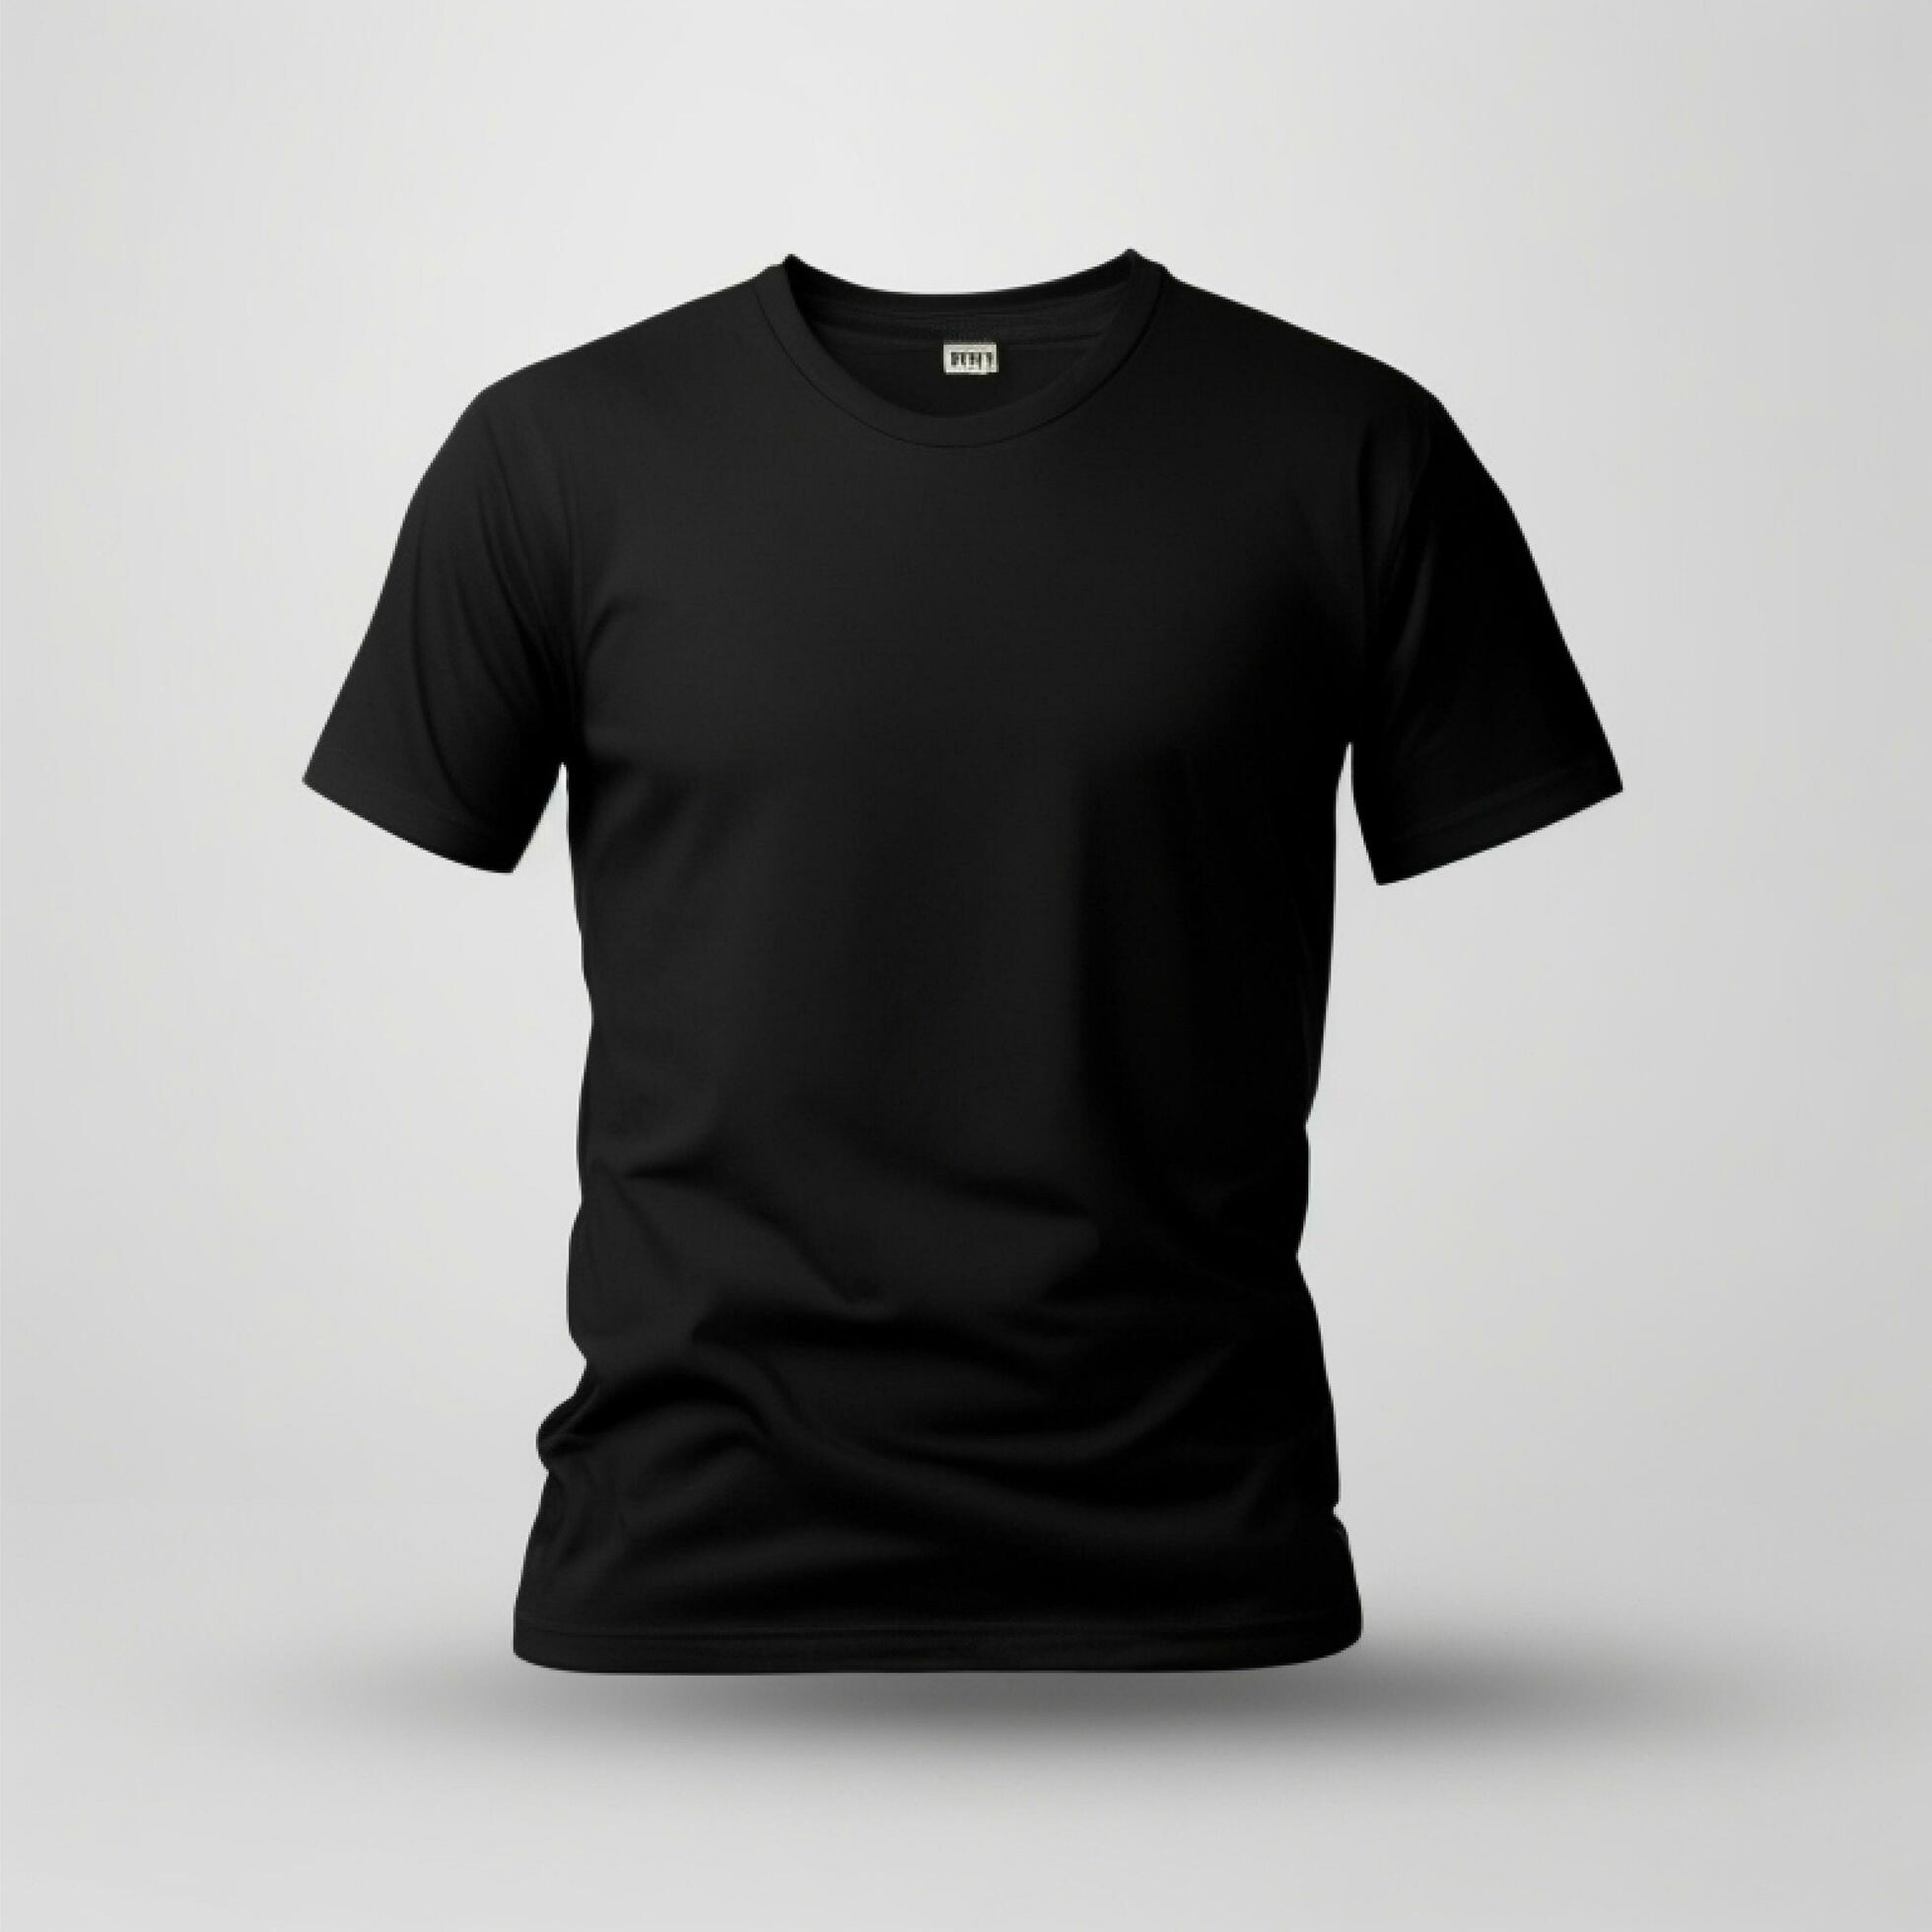 Free photo shirt mockup concept with plain clothing colorful t-shirts ...